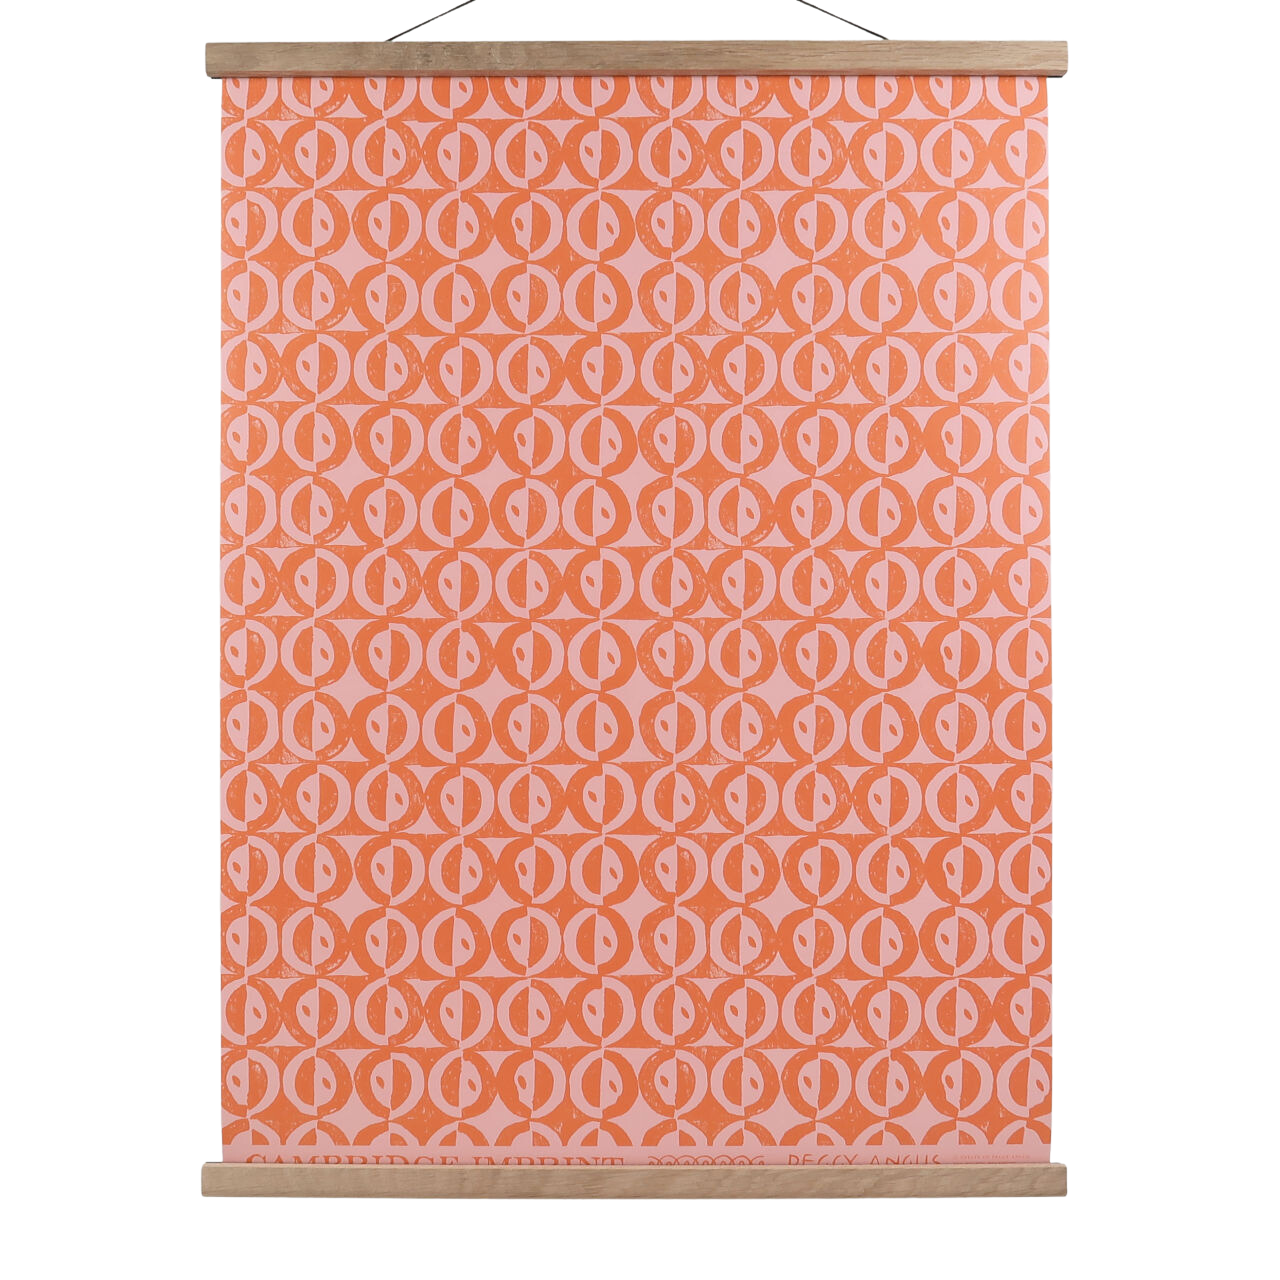 Cambridge Imprint Circles and Dots Giftwrap by Peggy Angus - 10 Sheets